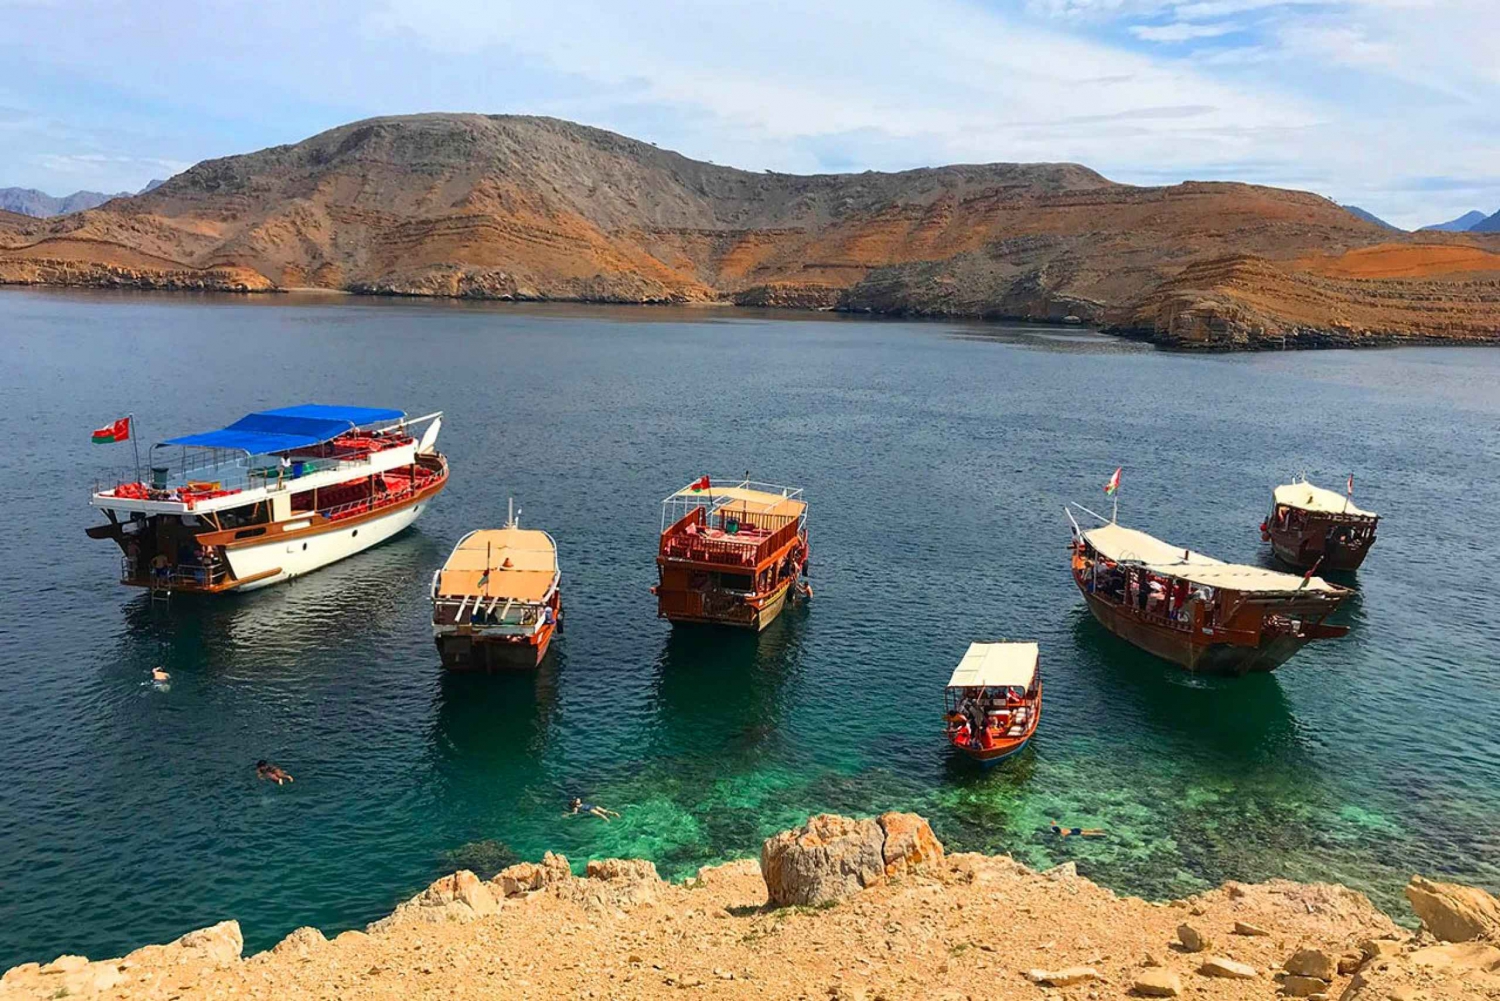 From Khasab: Half day Snorkeling tour with Dolphin Watching